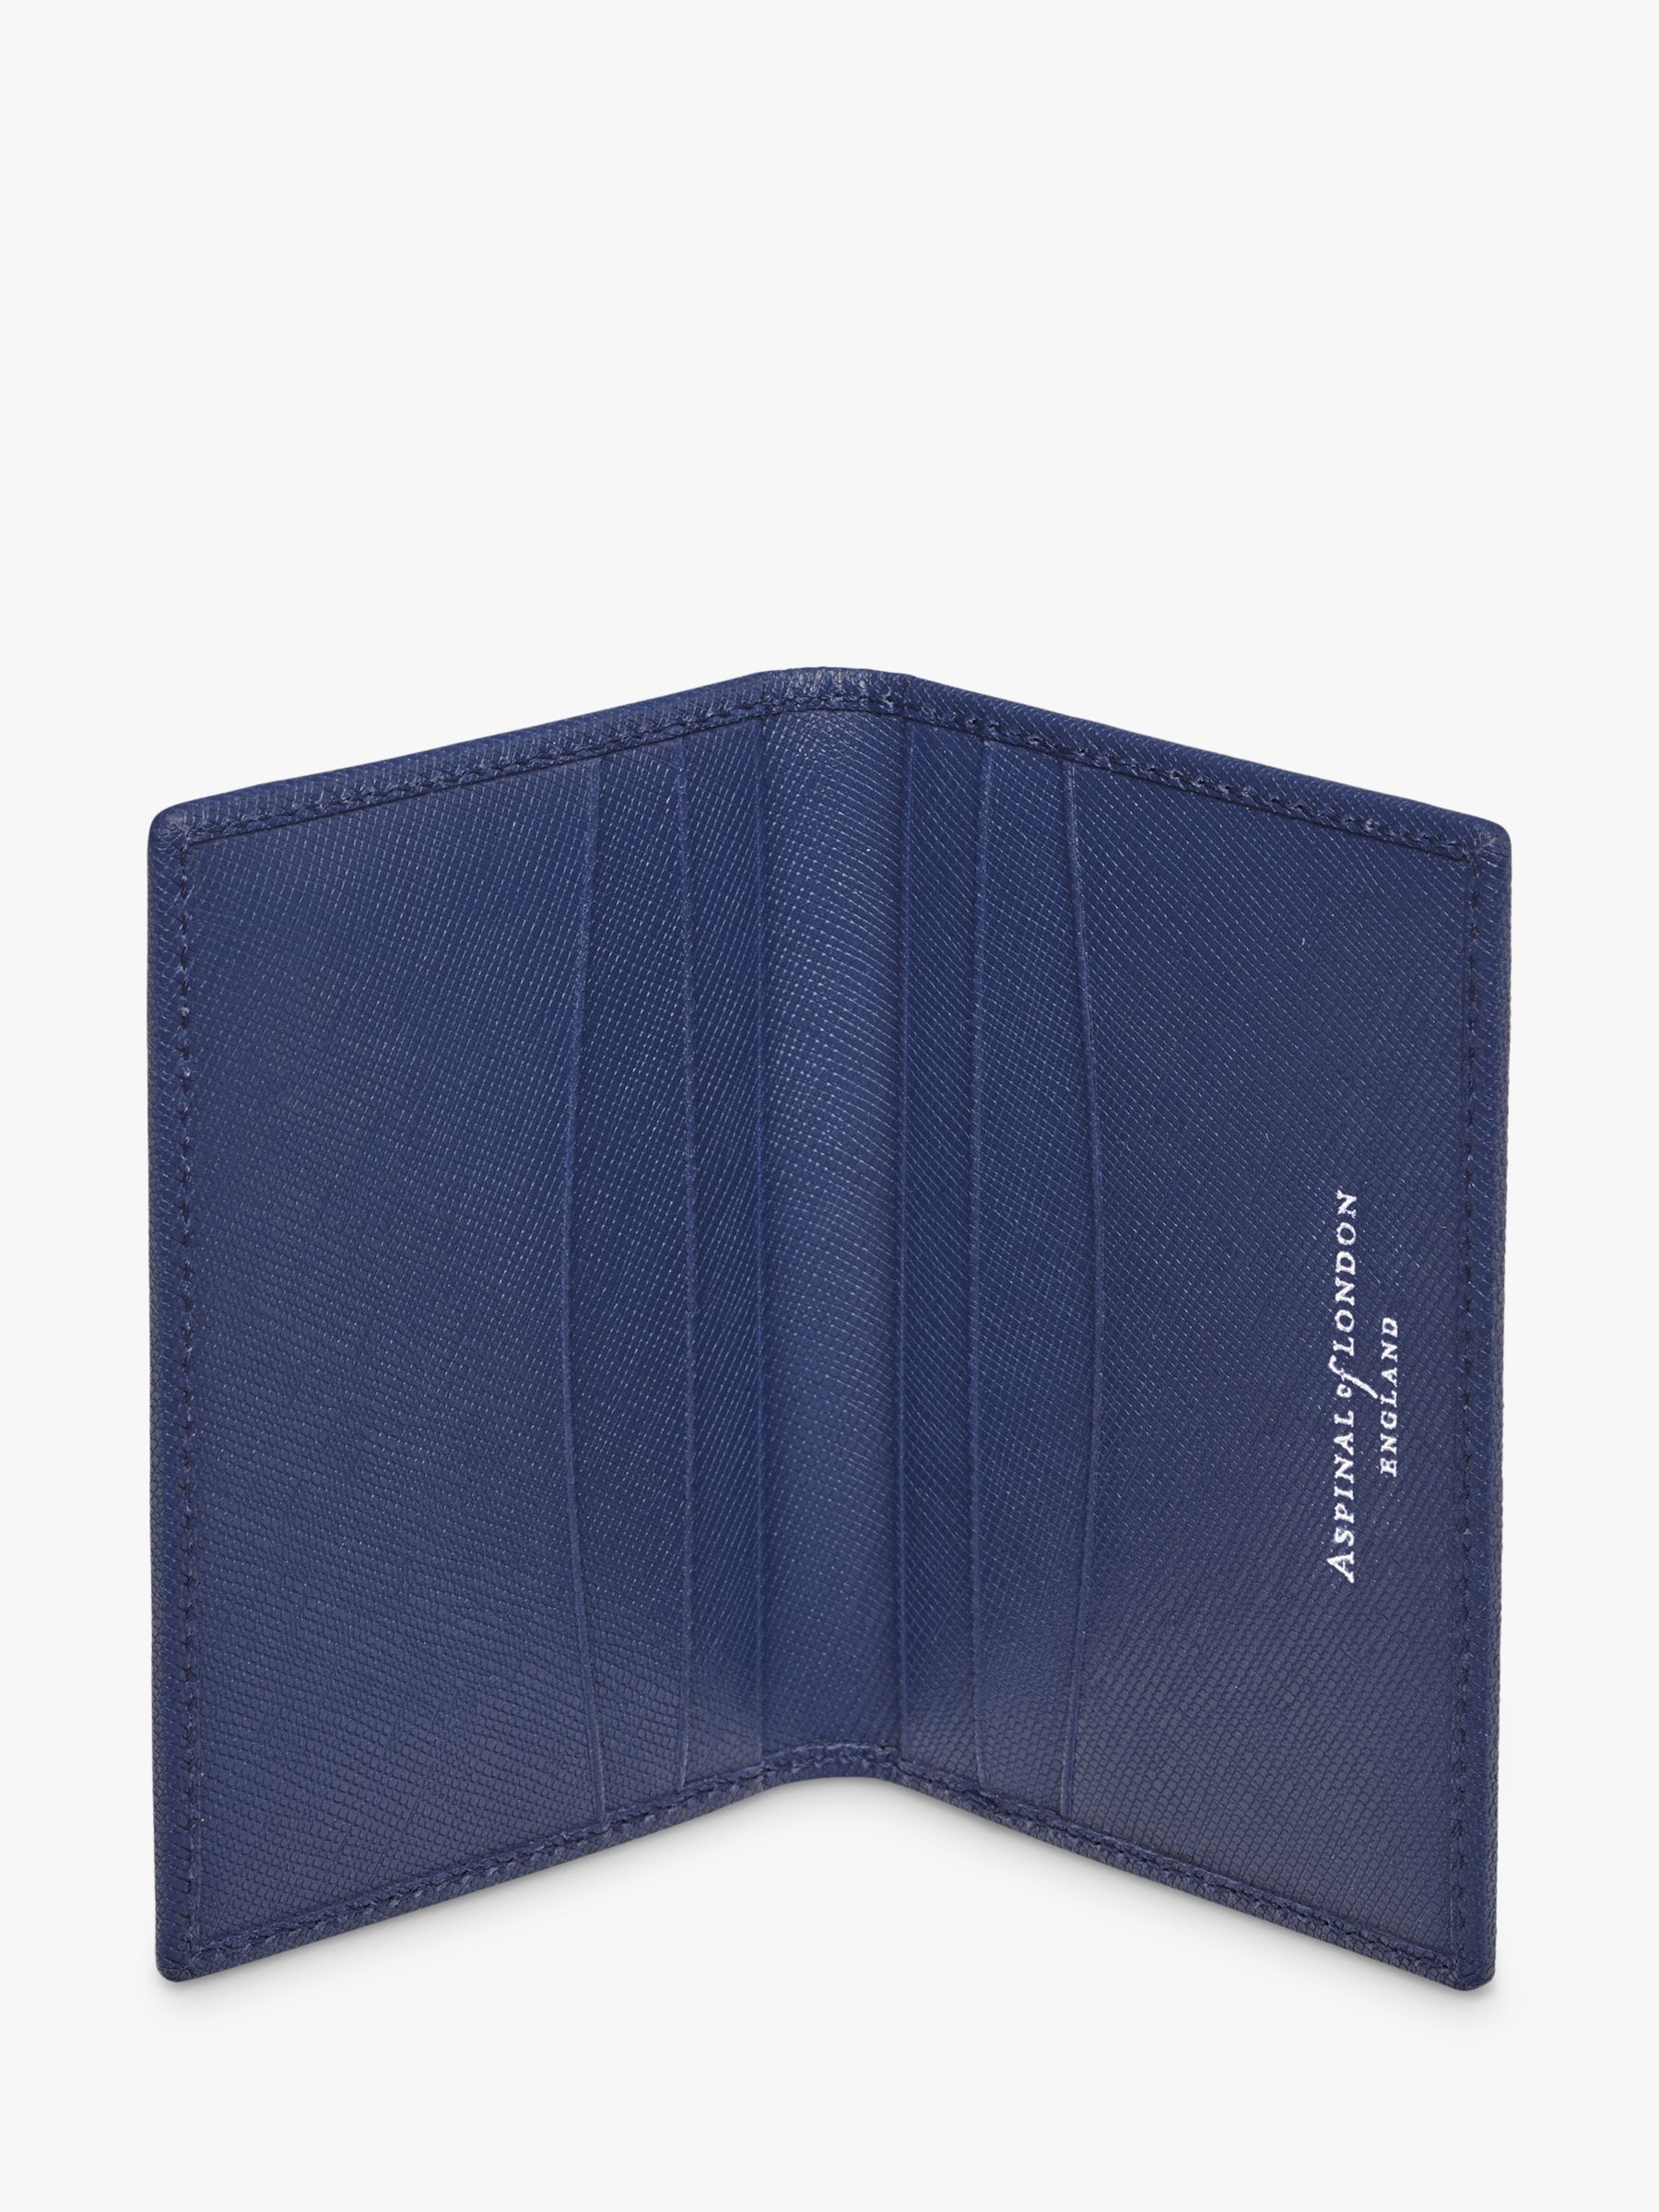 Aspinal of London Double Fold Leather Credit Card Holder, Caspian Blue ...